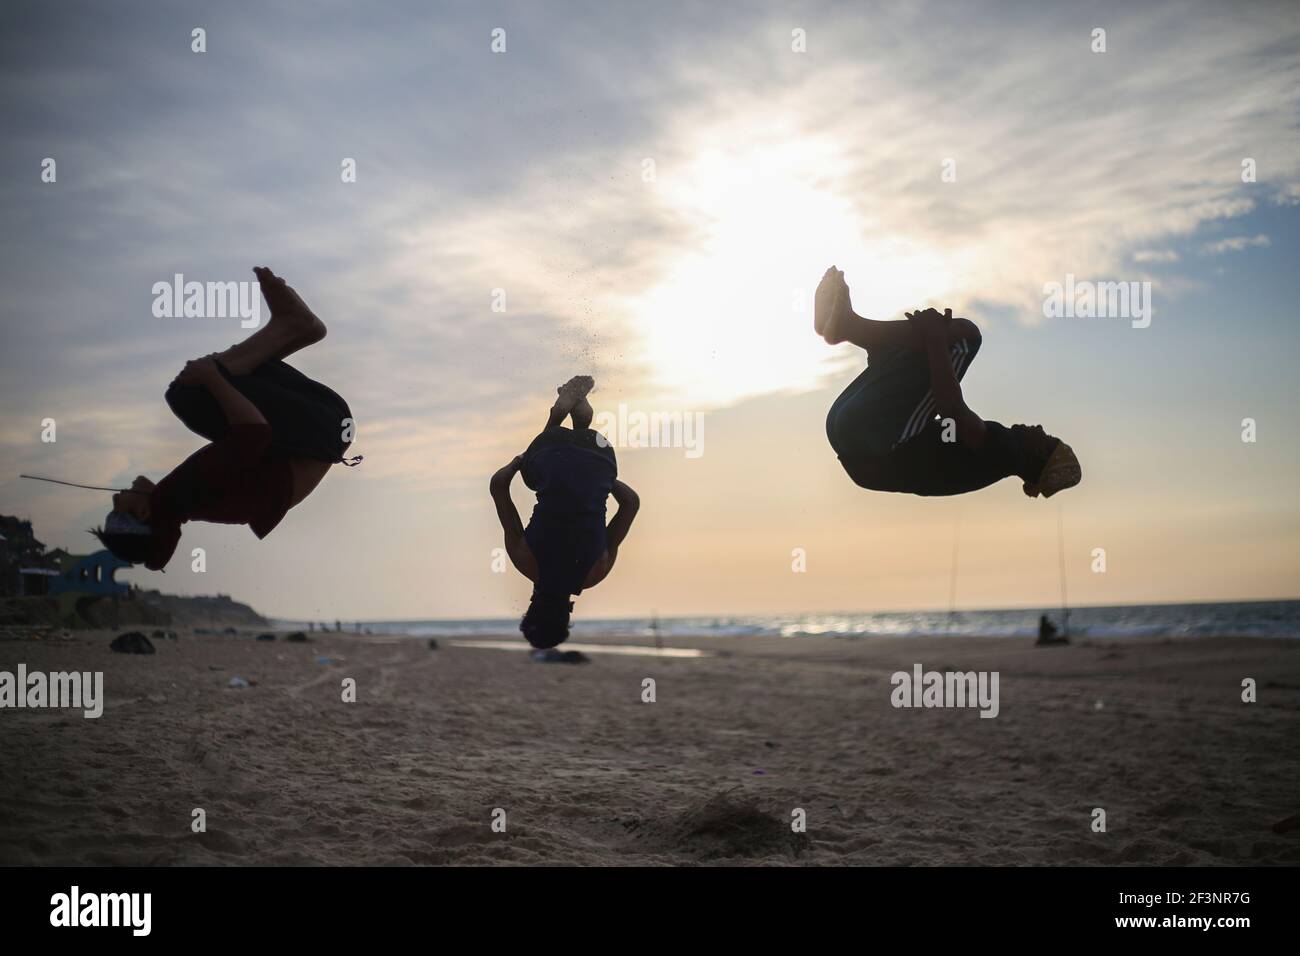 Palestinian Youth Practice Parkour in Gaza Stock Photo